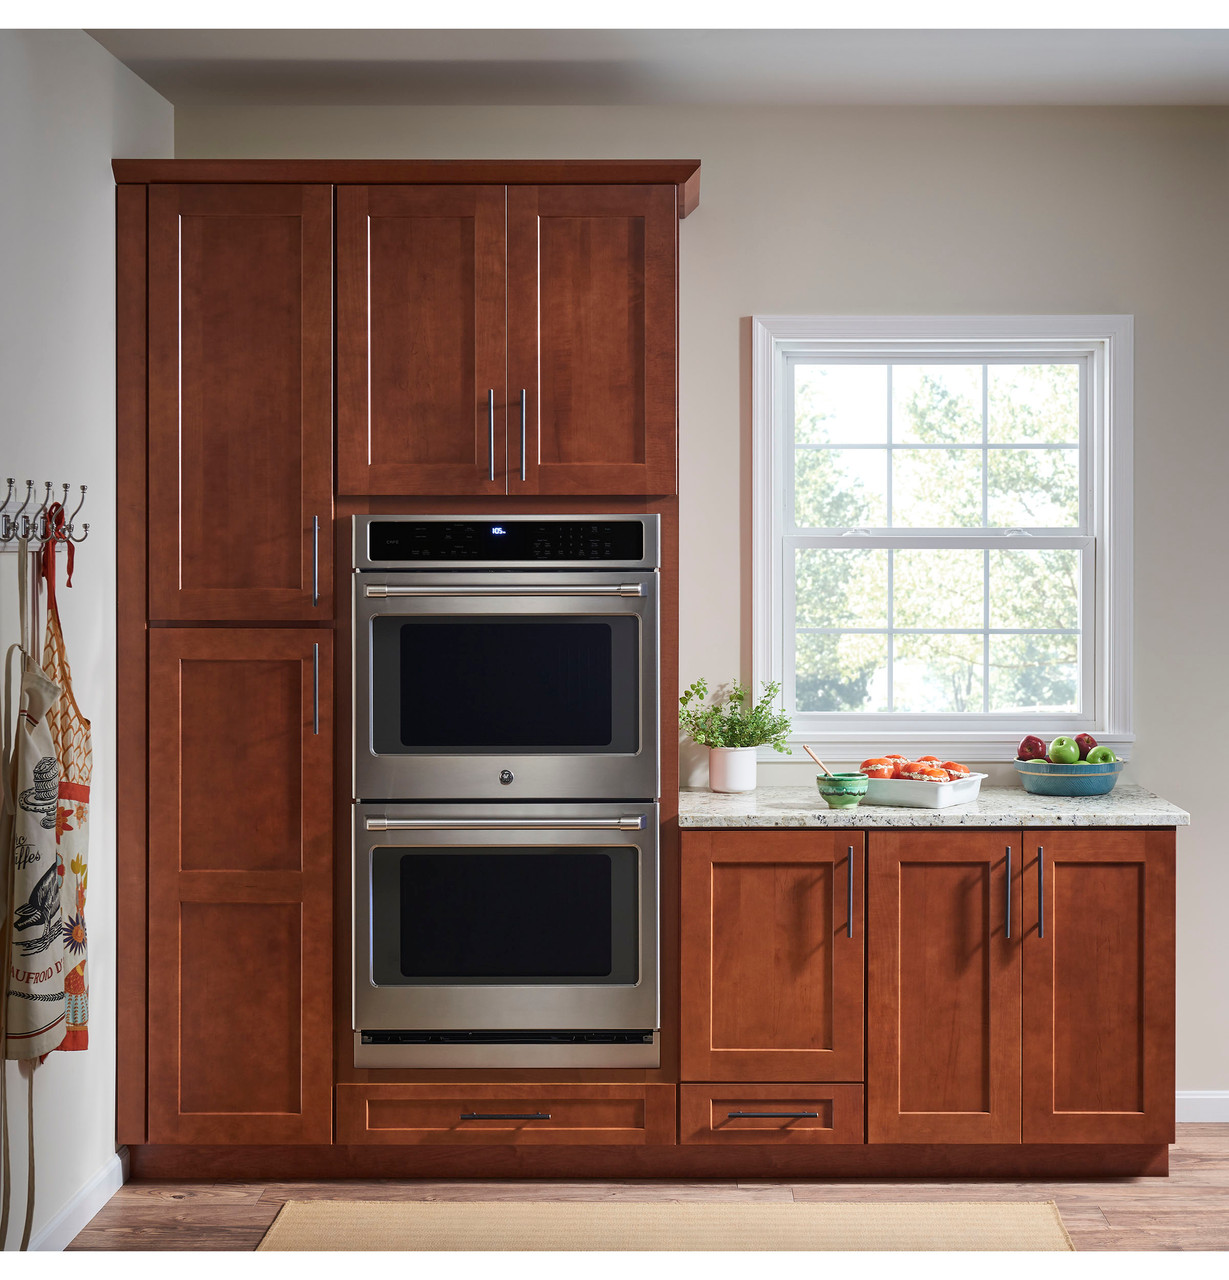 GE Café™ Series 30" Built-In Double Convection Wall Oven - CT9550SHSS -  Cafe Appliances